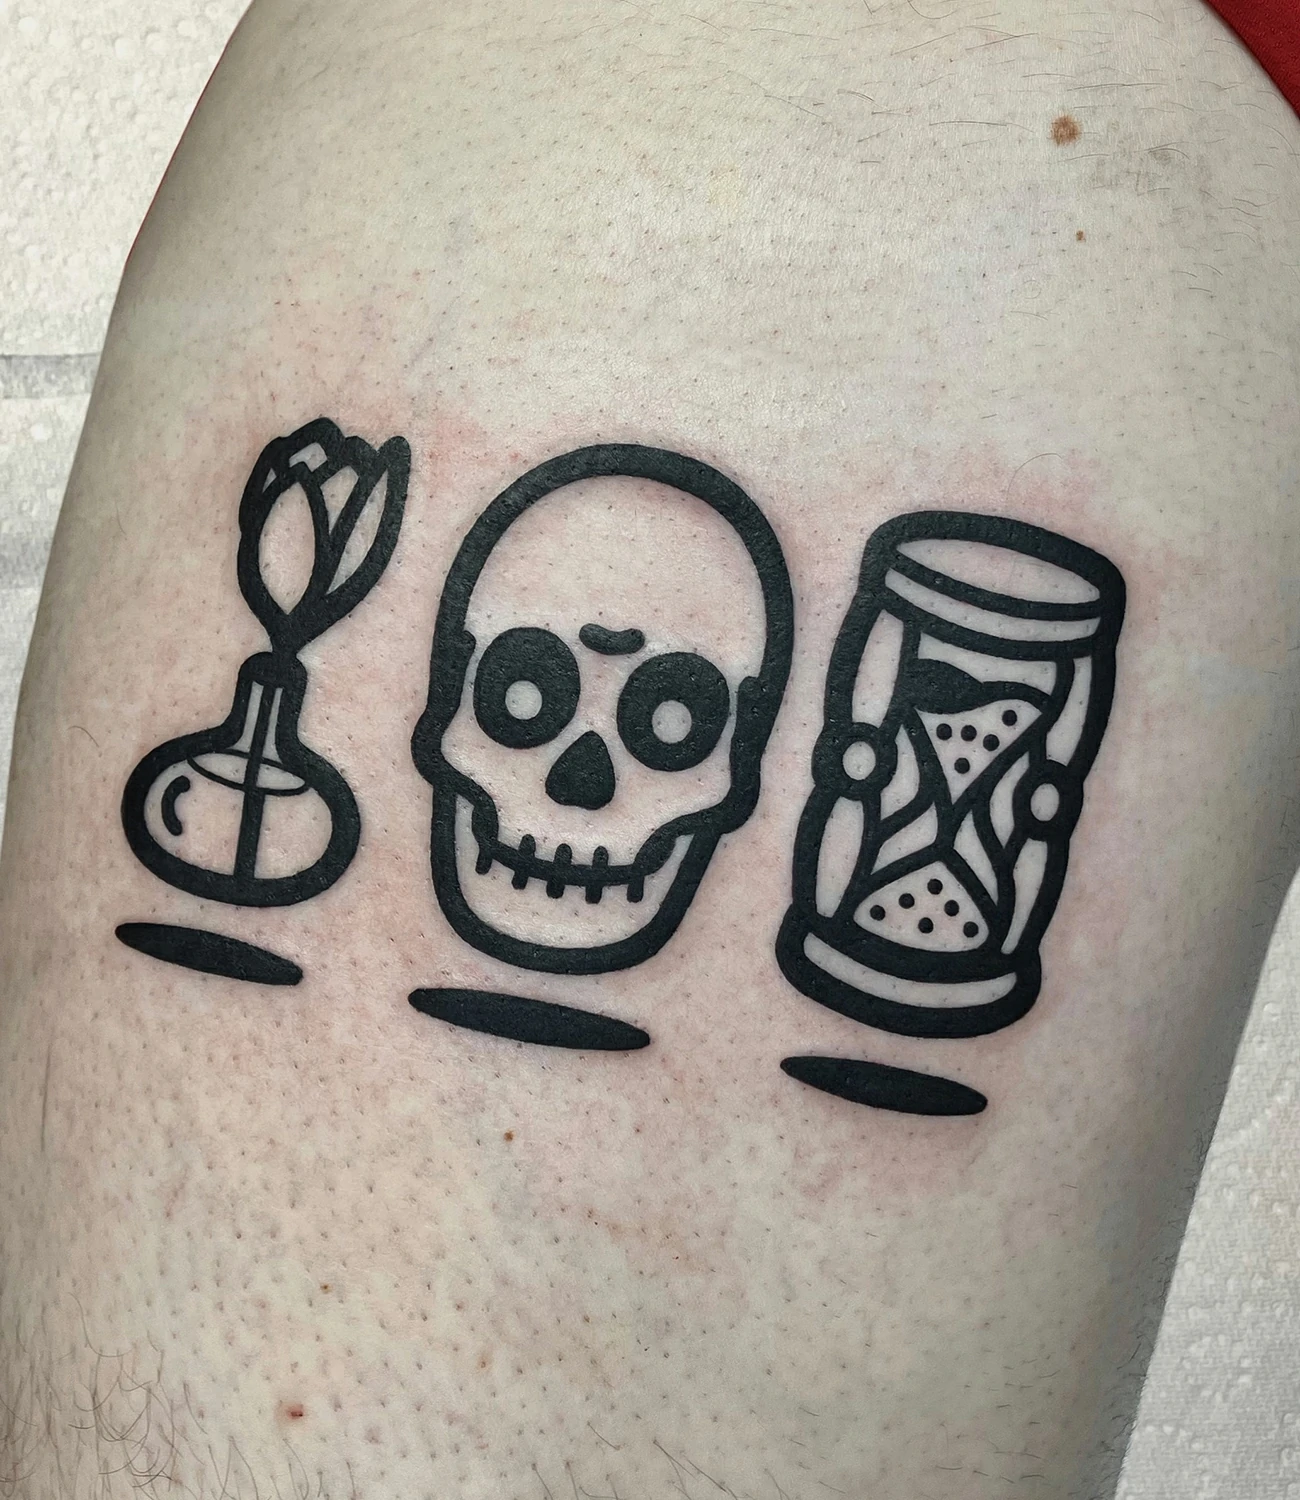 memento mori tattoo simple: A straightforward, no-frills "memento mori" tattoo, focusing solely on the text in a clean font.